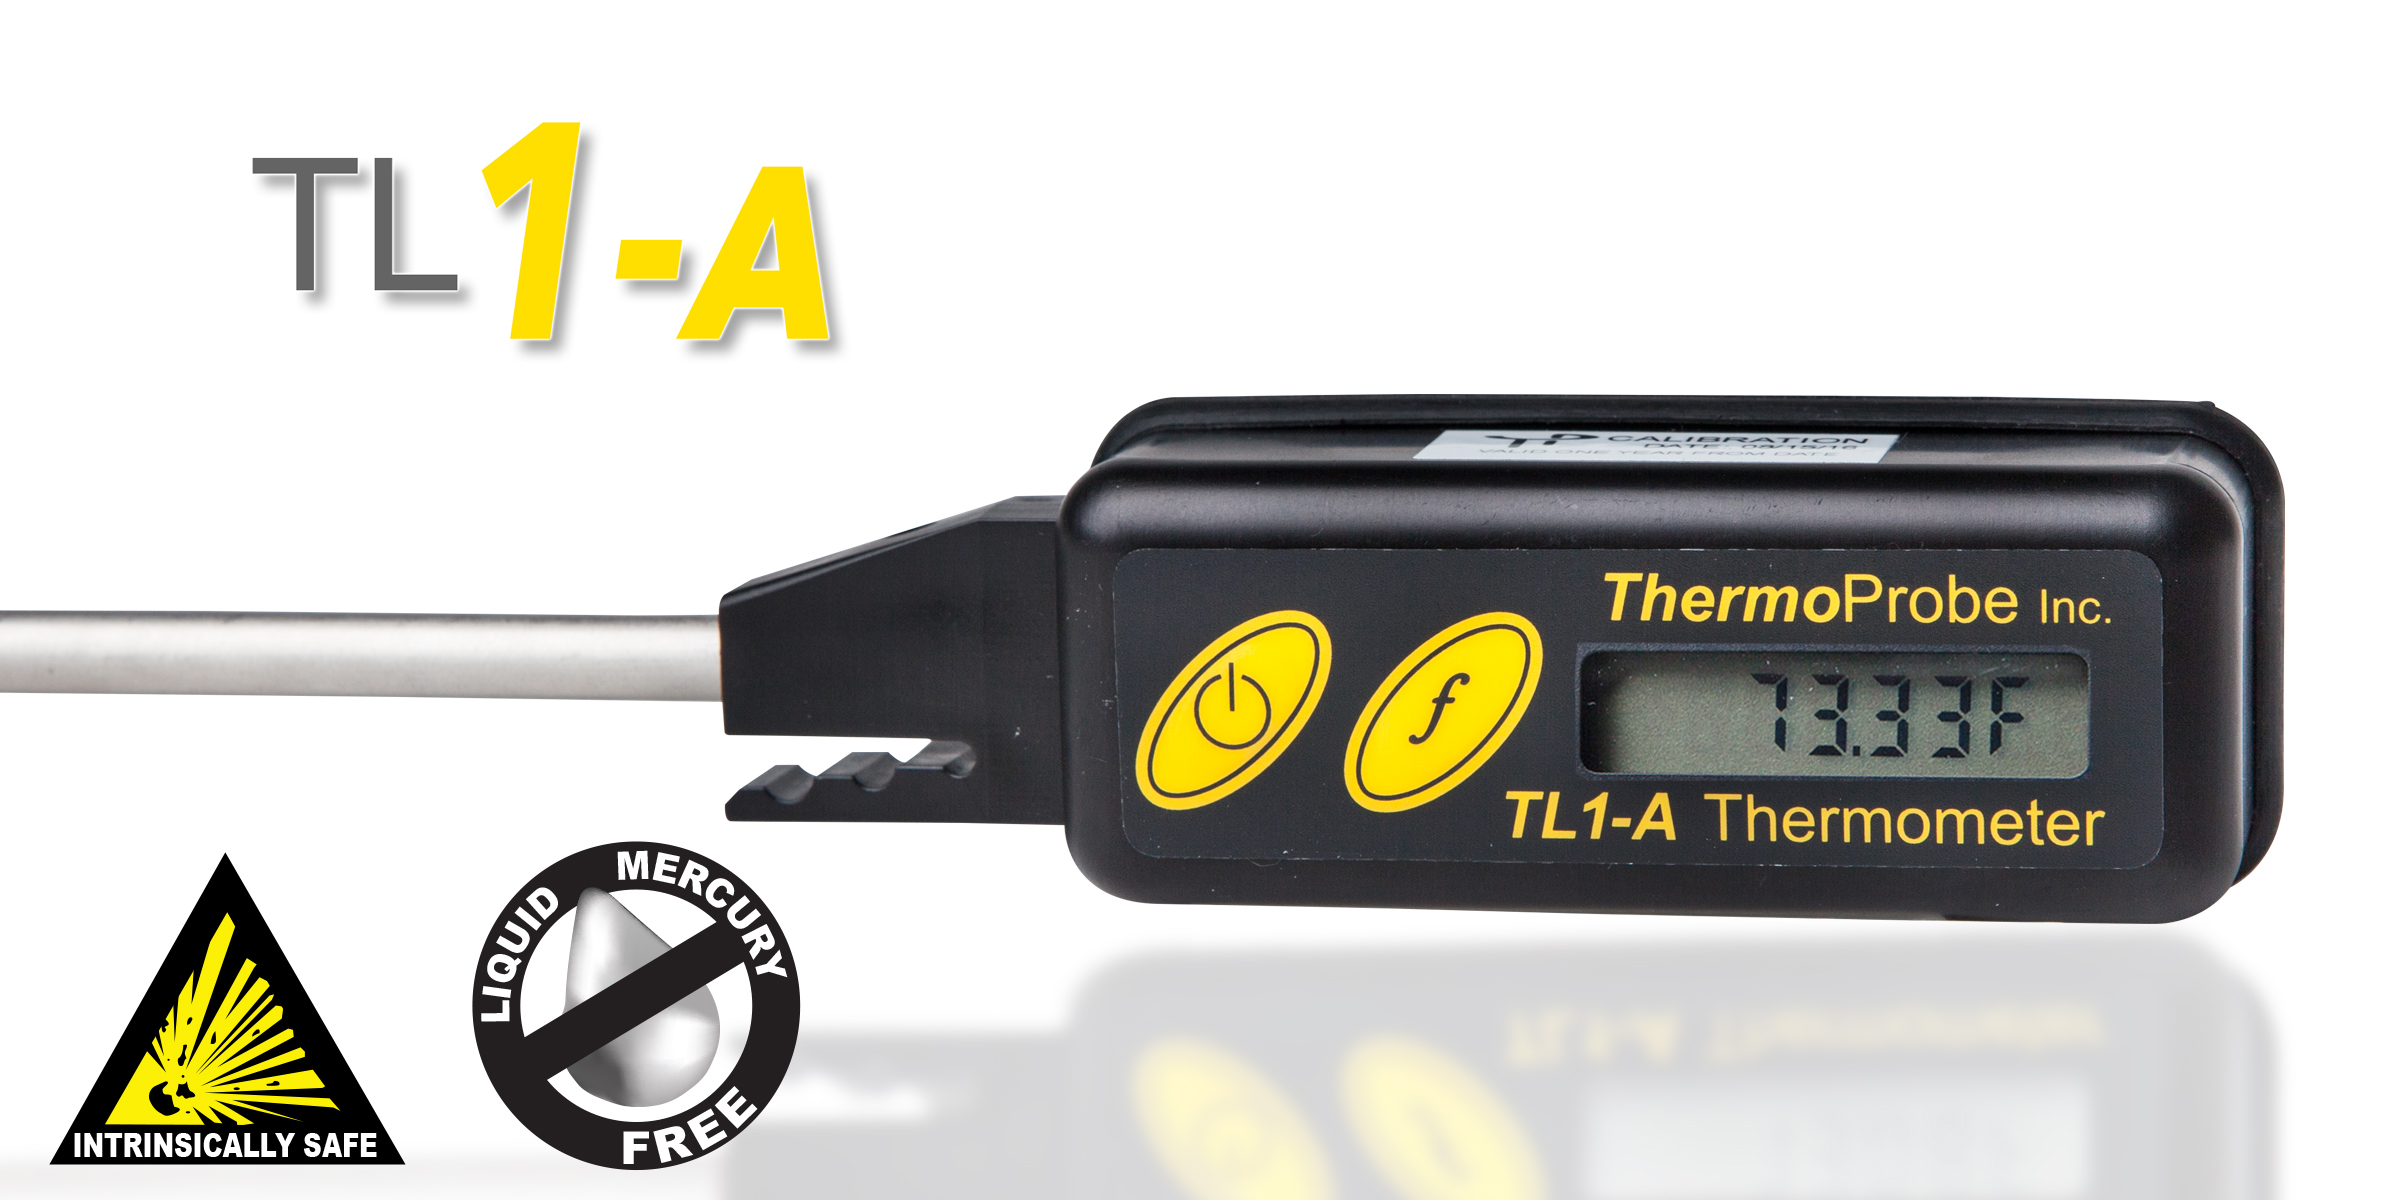 Features for the ThermoProbe TL1-A